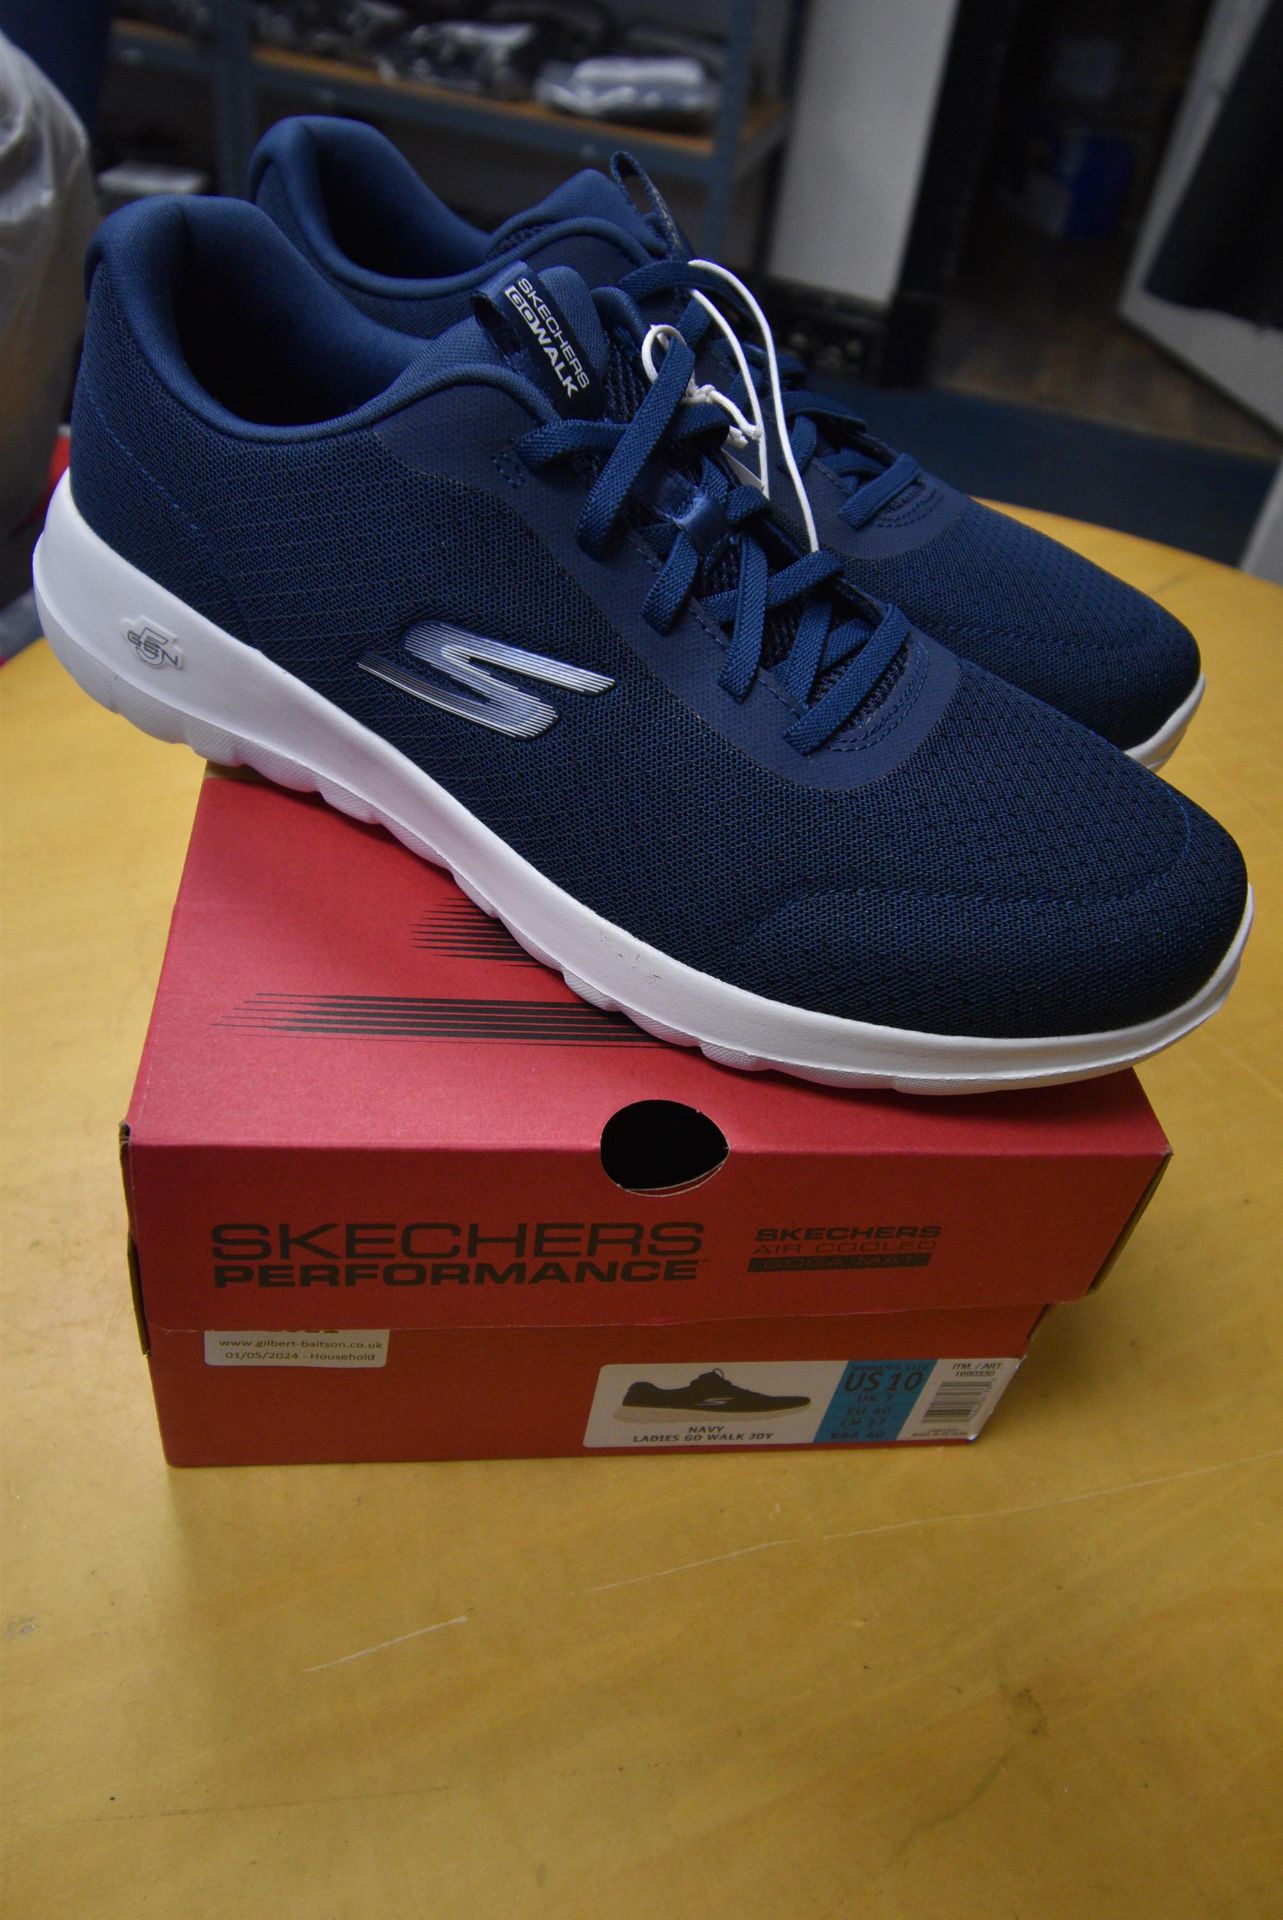 *Skechers Air Cooled Goga Mat Trainers Size: 7